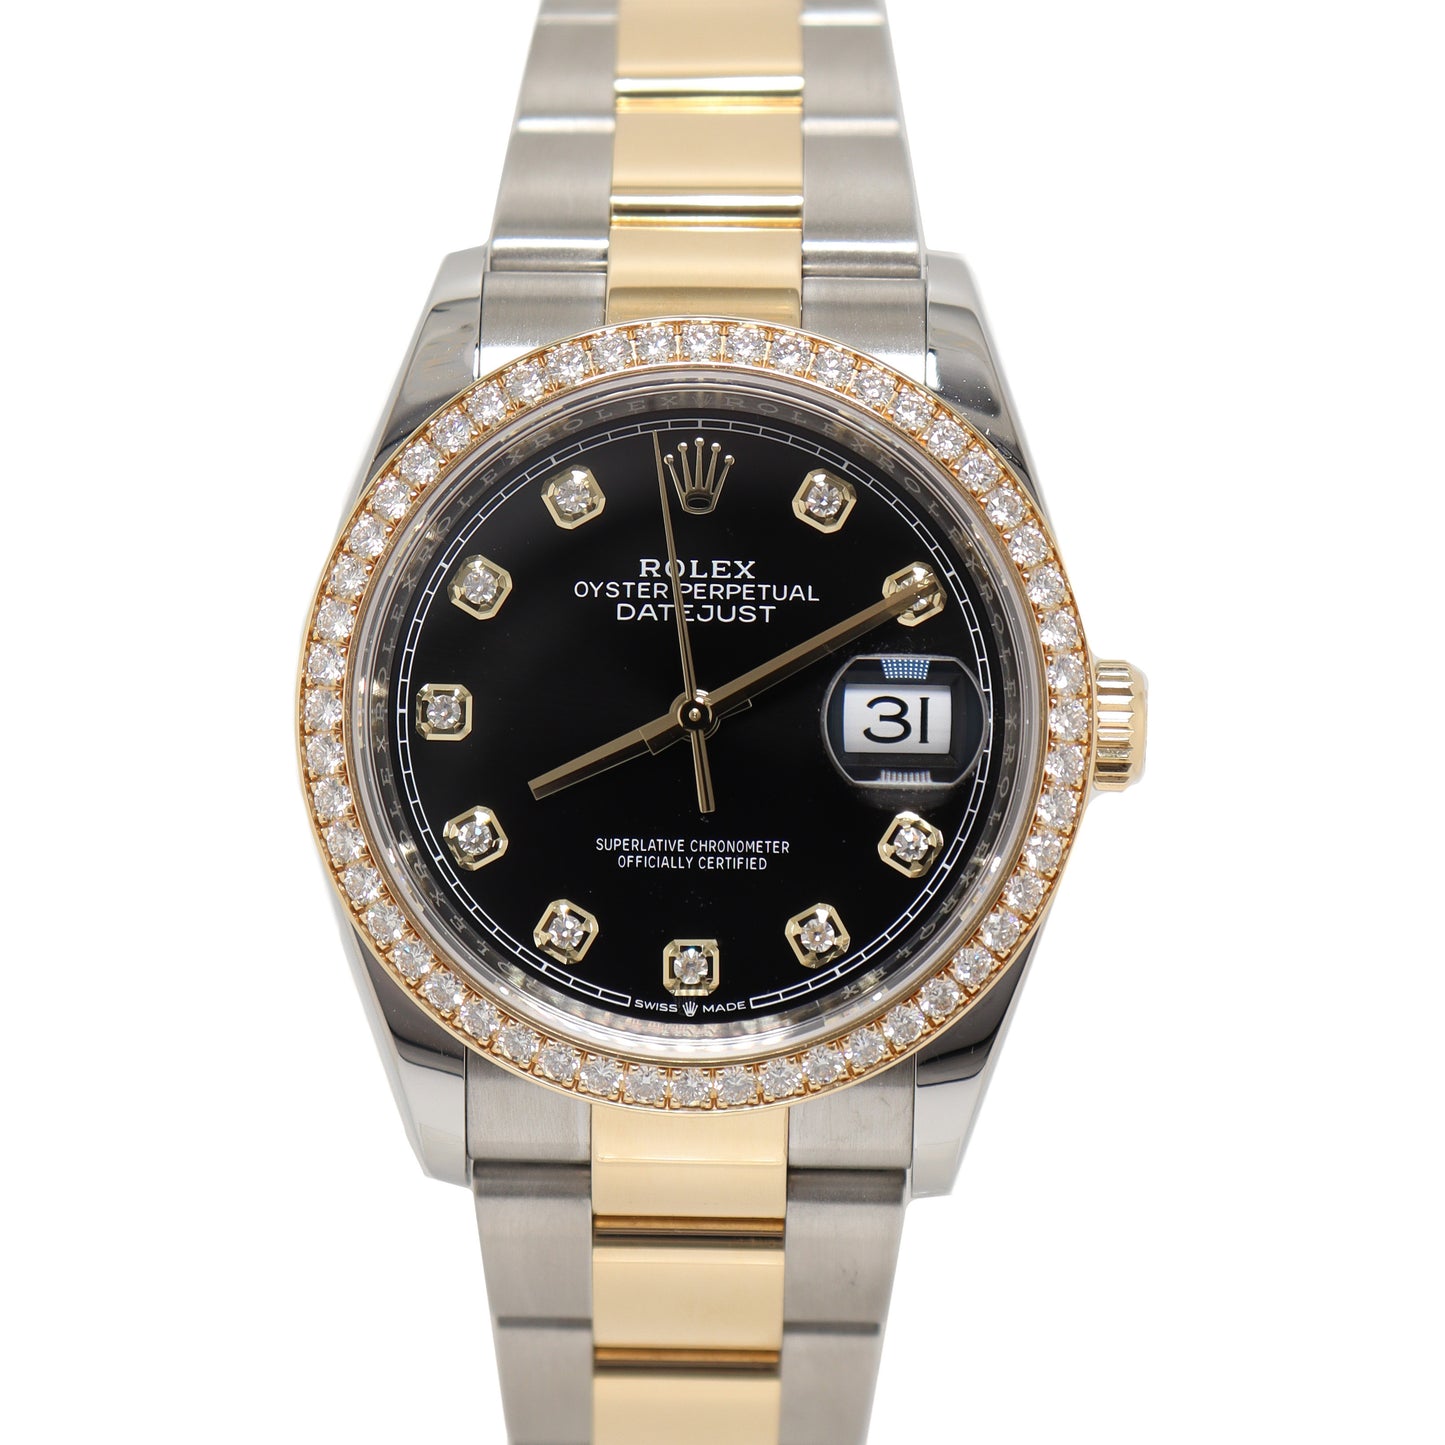 Rolex Datejust Yellow Gold & Stainless Steel 36mm Factory Black Diamond Dial Watch Reference# 126283RBR - Happy Jewelers Fine Jewelry Lifetime Warranty